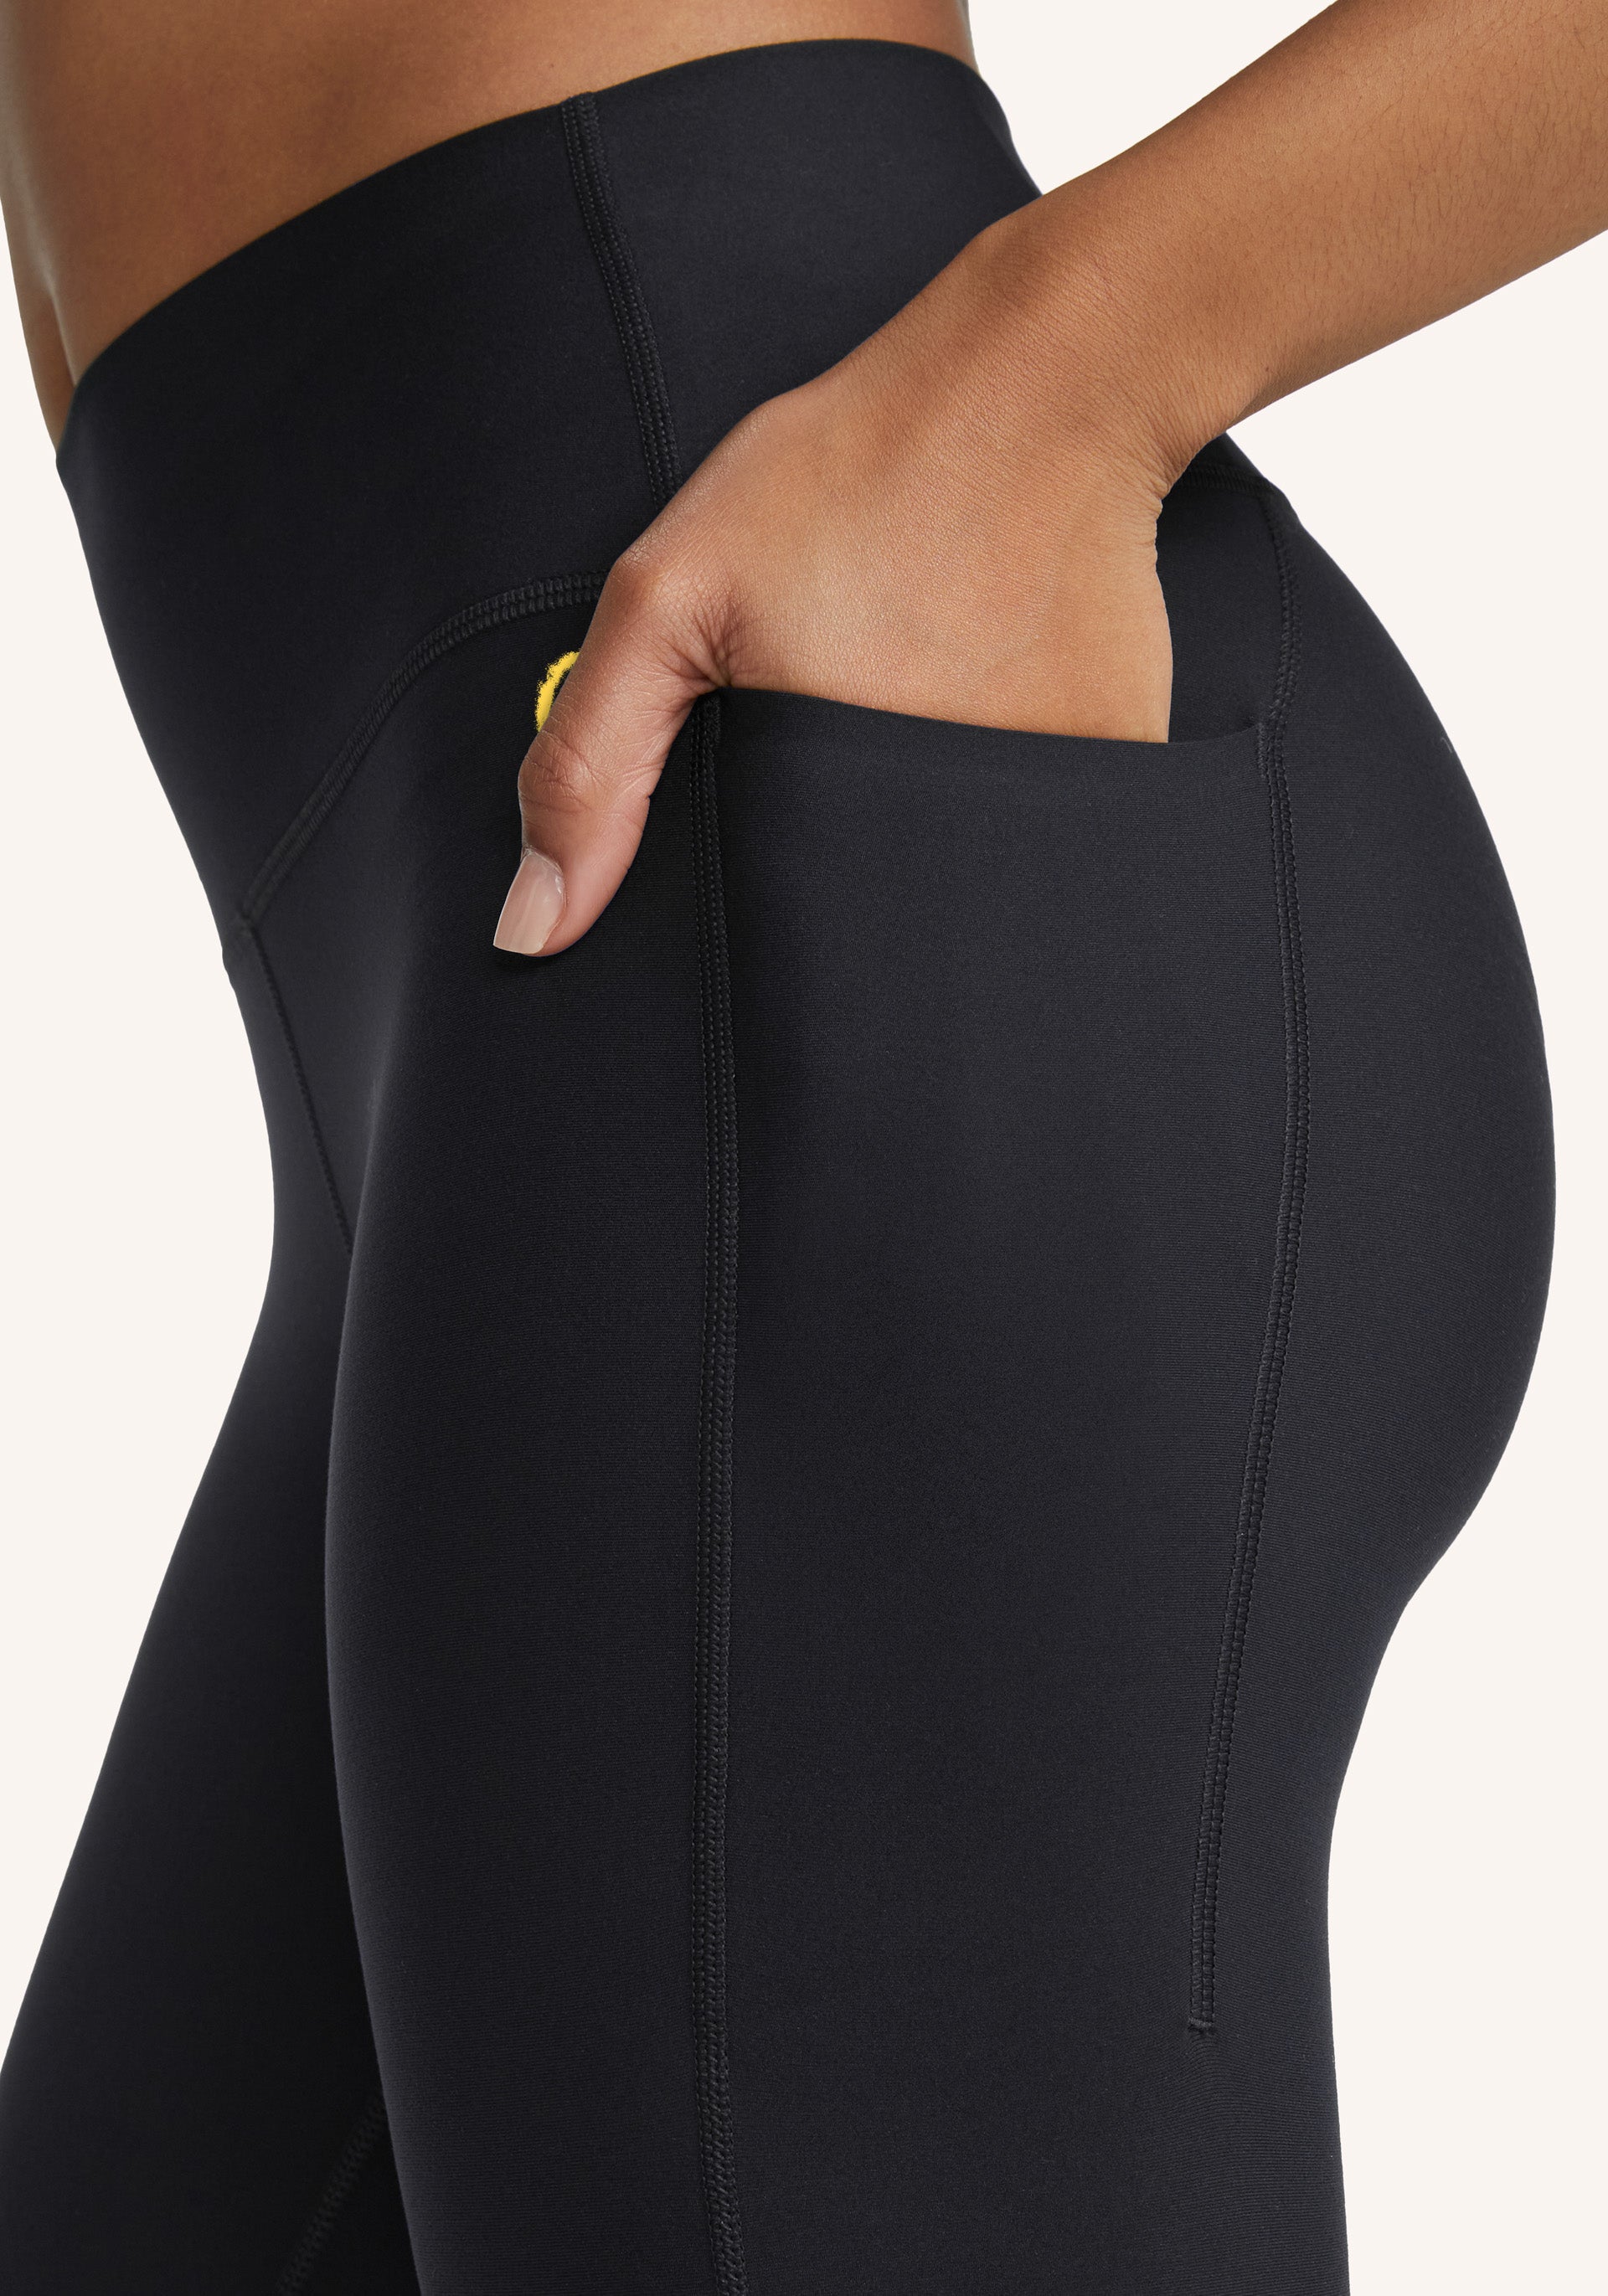 Peloton Show Up Ribbed Side Pocket Logo Leggings Size Large Cycling - $36 -  From Abigail